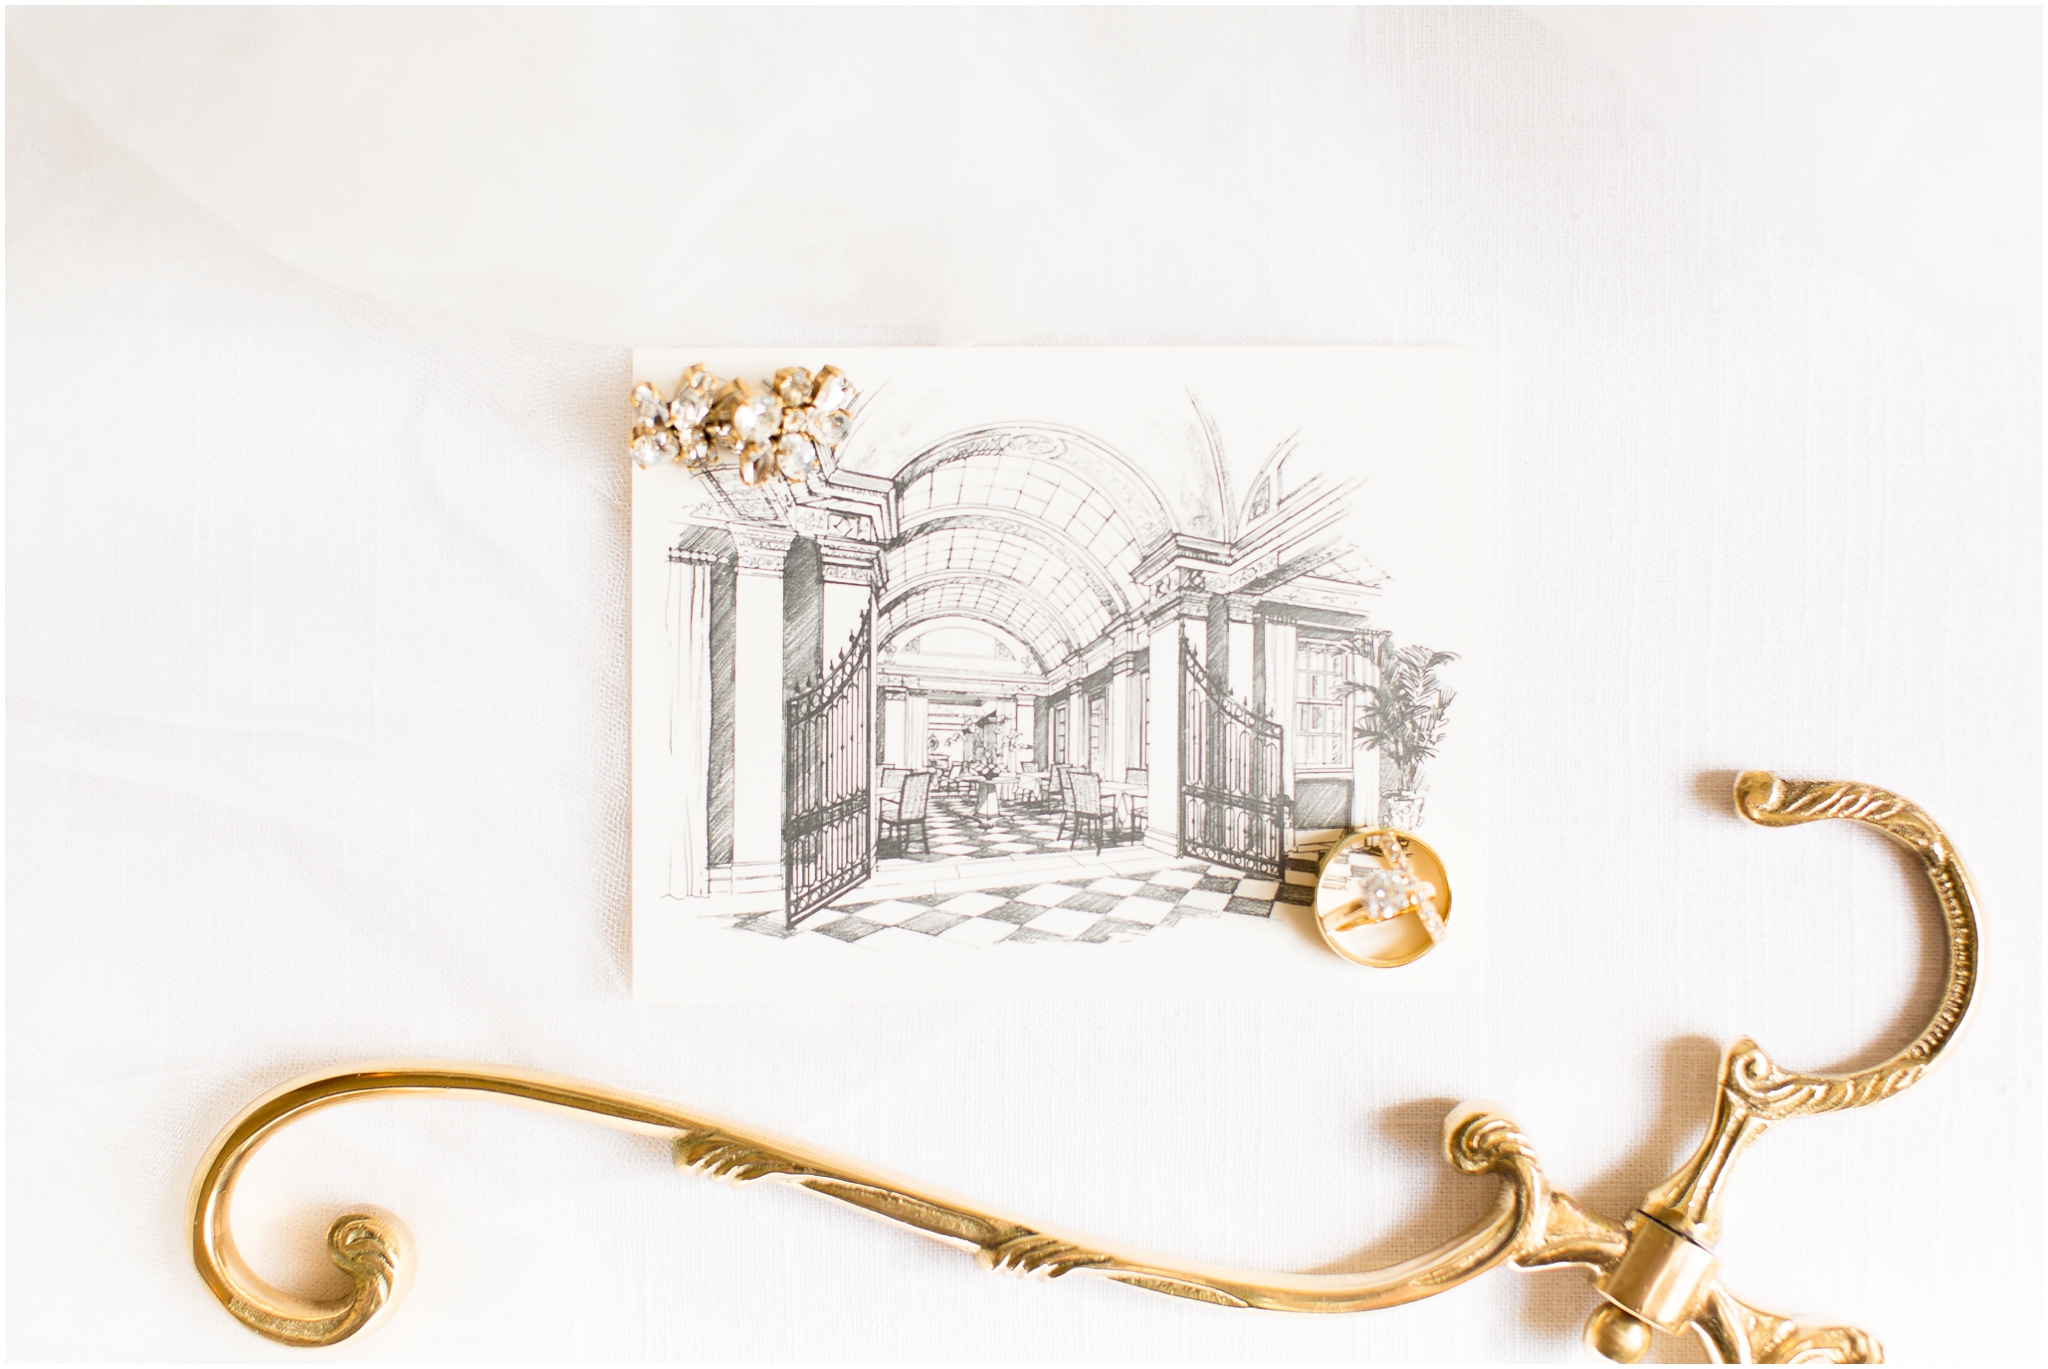 Glamorous gatsby style wedding at the Jefferson Hotel DC was captured by DC wedding photographer Taylor Rose Photography. Includes gold wedding bands and gold anthropologie hanger.